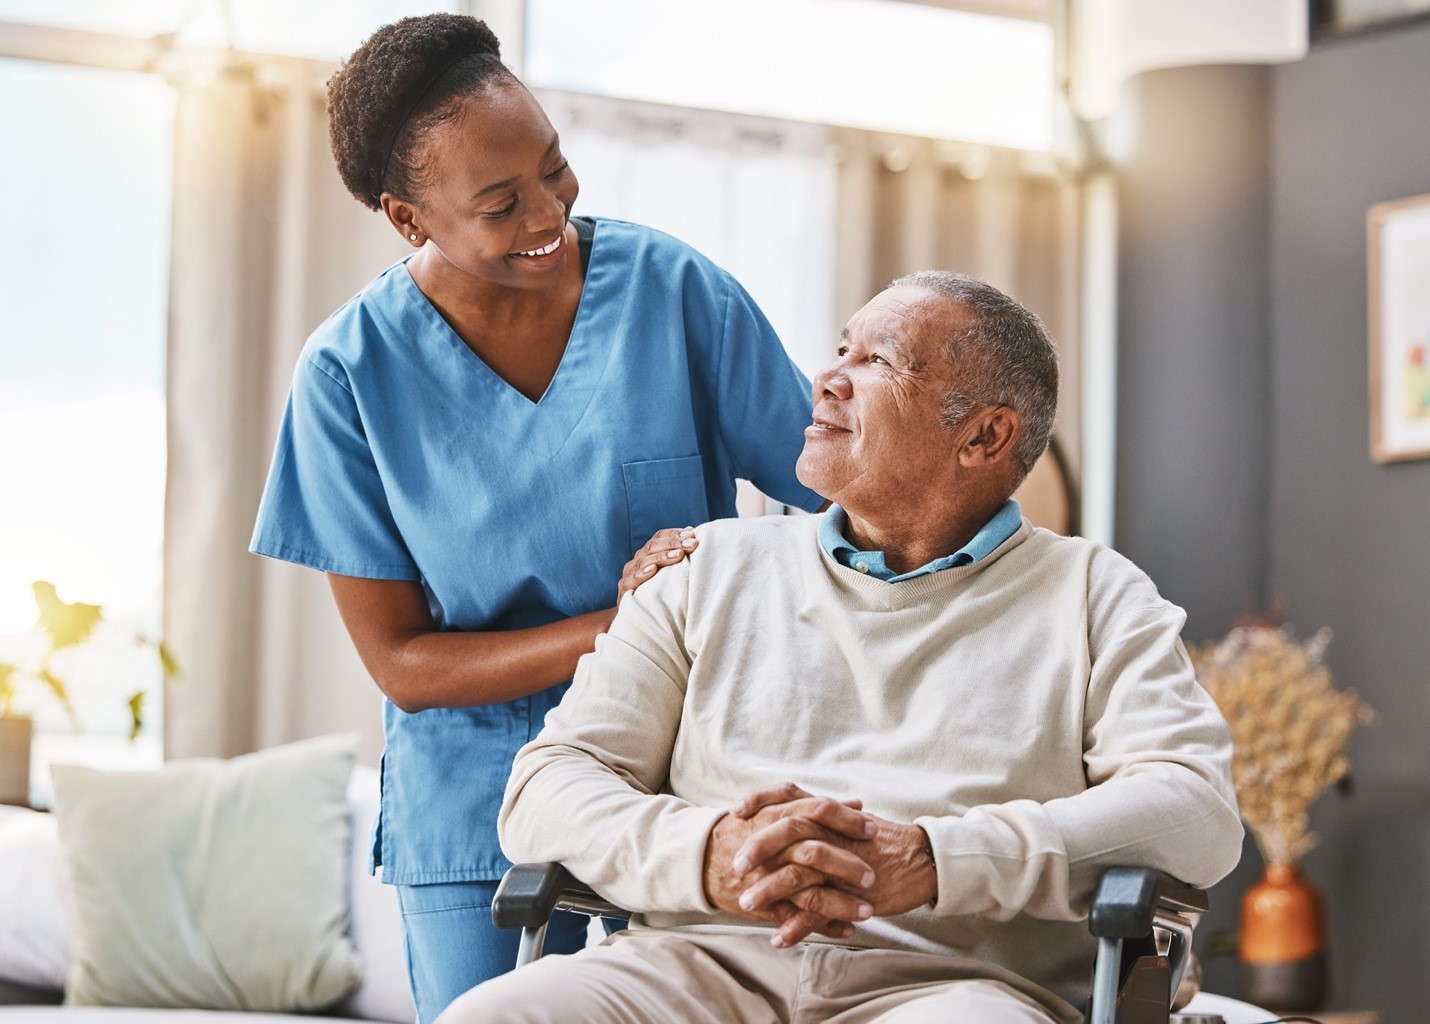 A Day in the Life – Skilled Nursing Patient